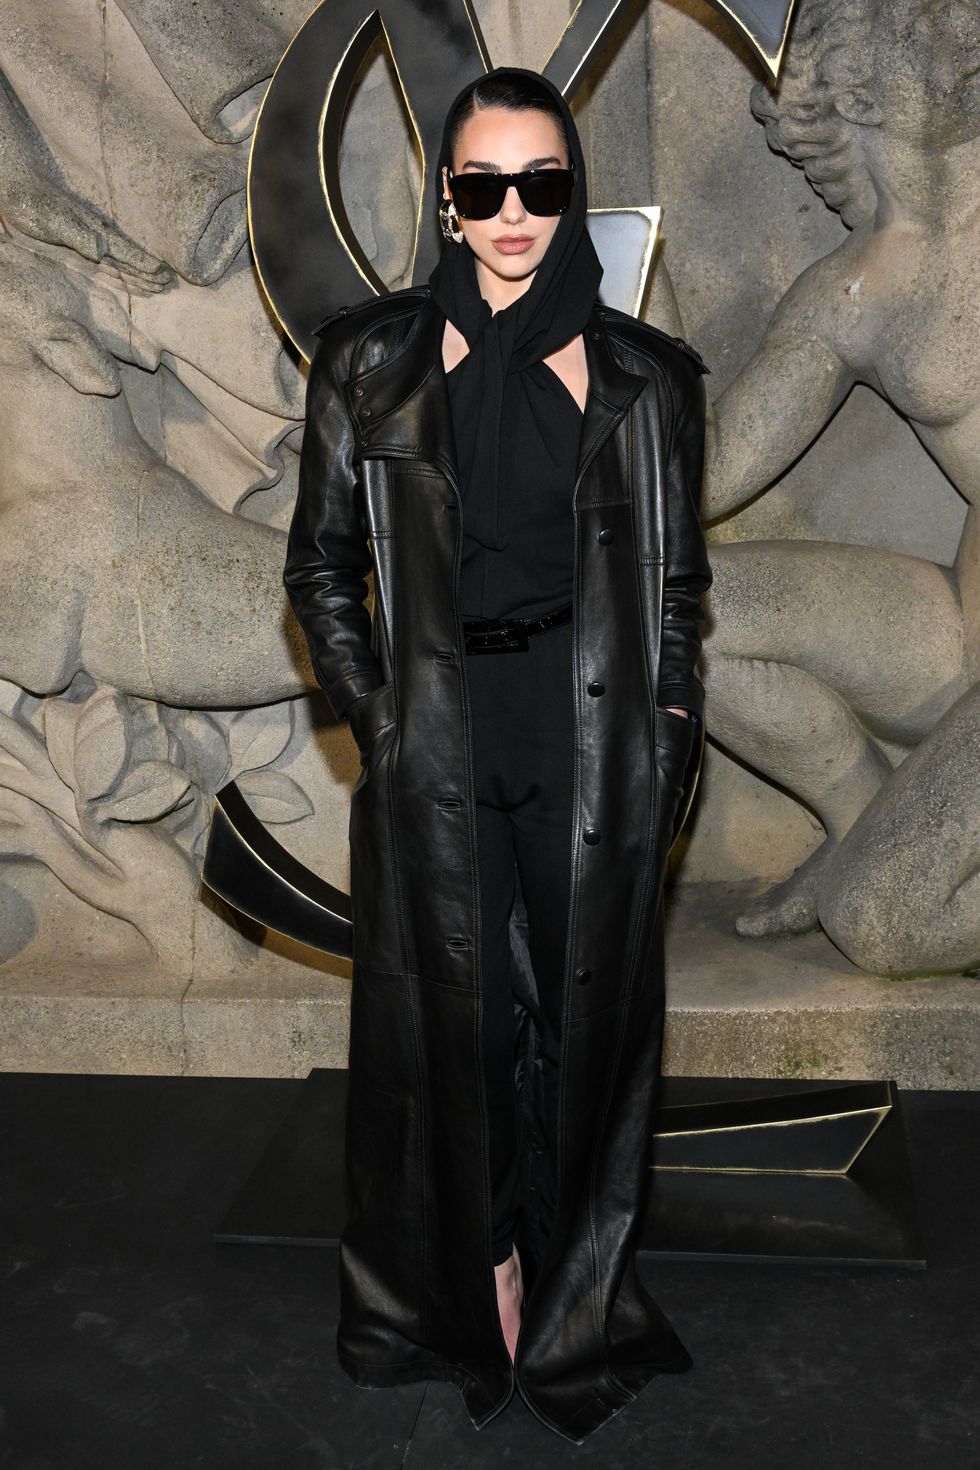 paris, france february 28 editorial use only for non editorial use please seek approval from fashion house dua lipa attends the saint laurent womenswear fall winter 2023 2024 show as part of paris fashion week on february 28, 2023 in paris, france photo by stephane cardinale corbiscorbis via getty images